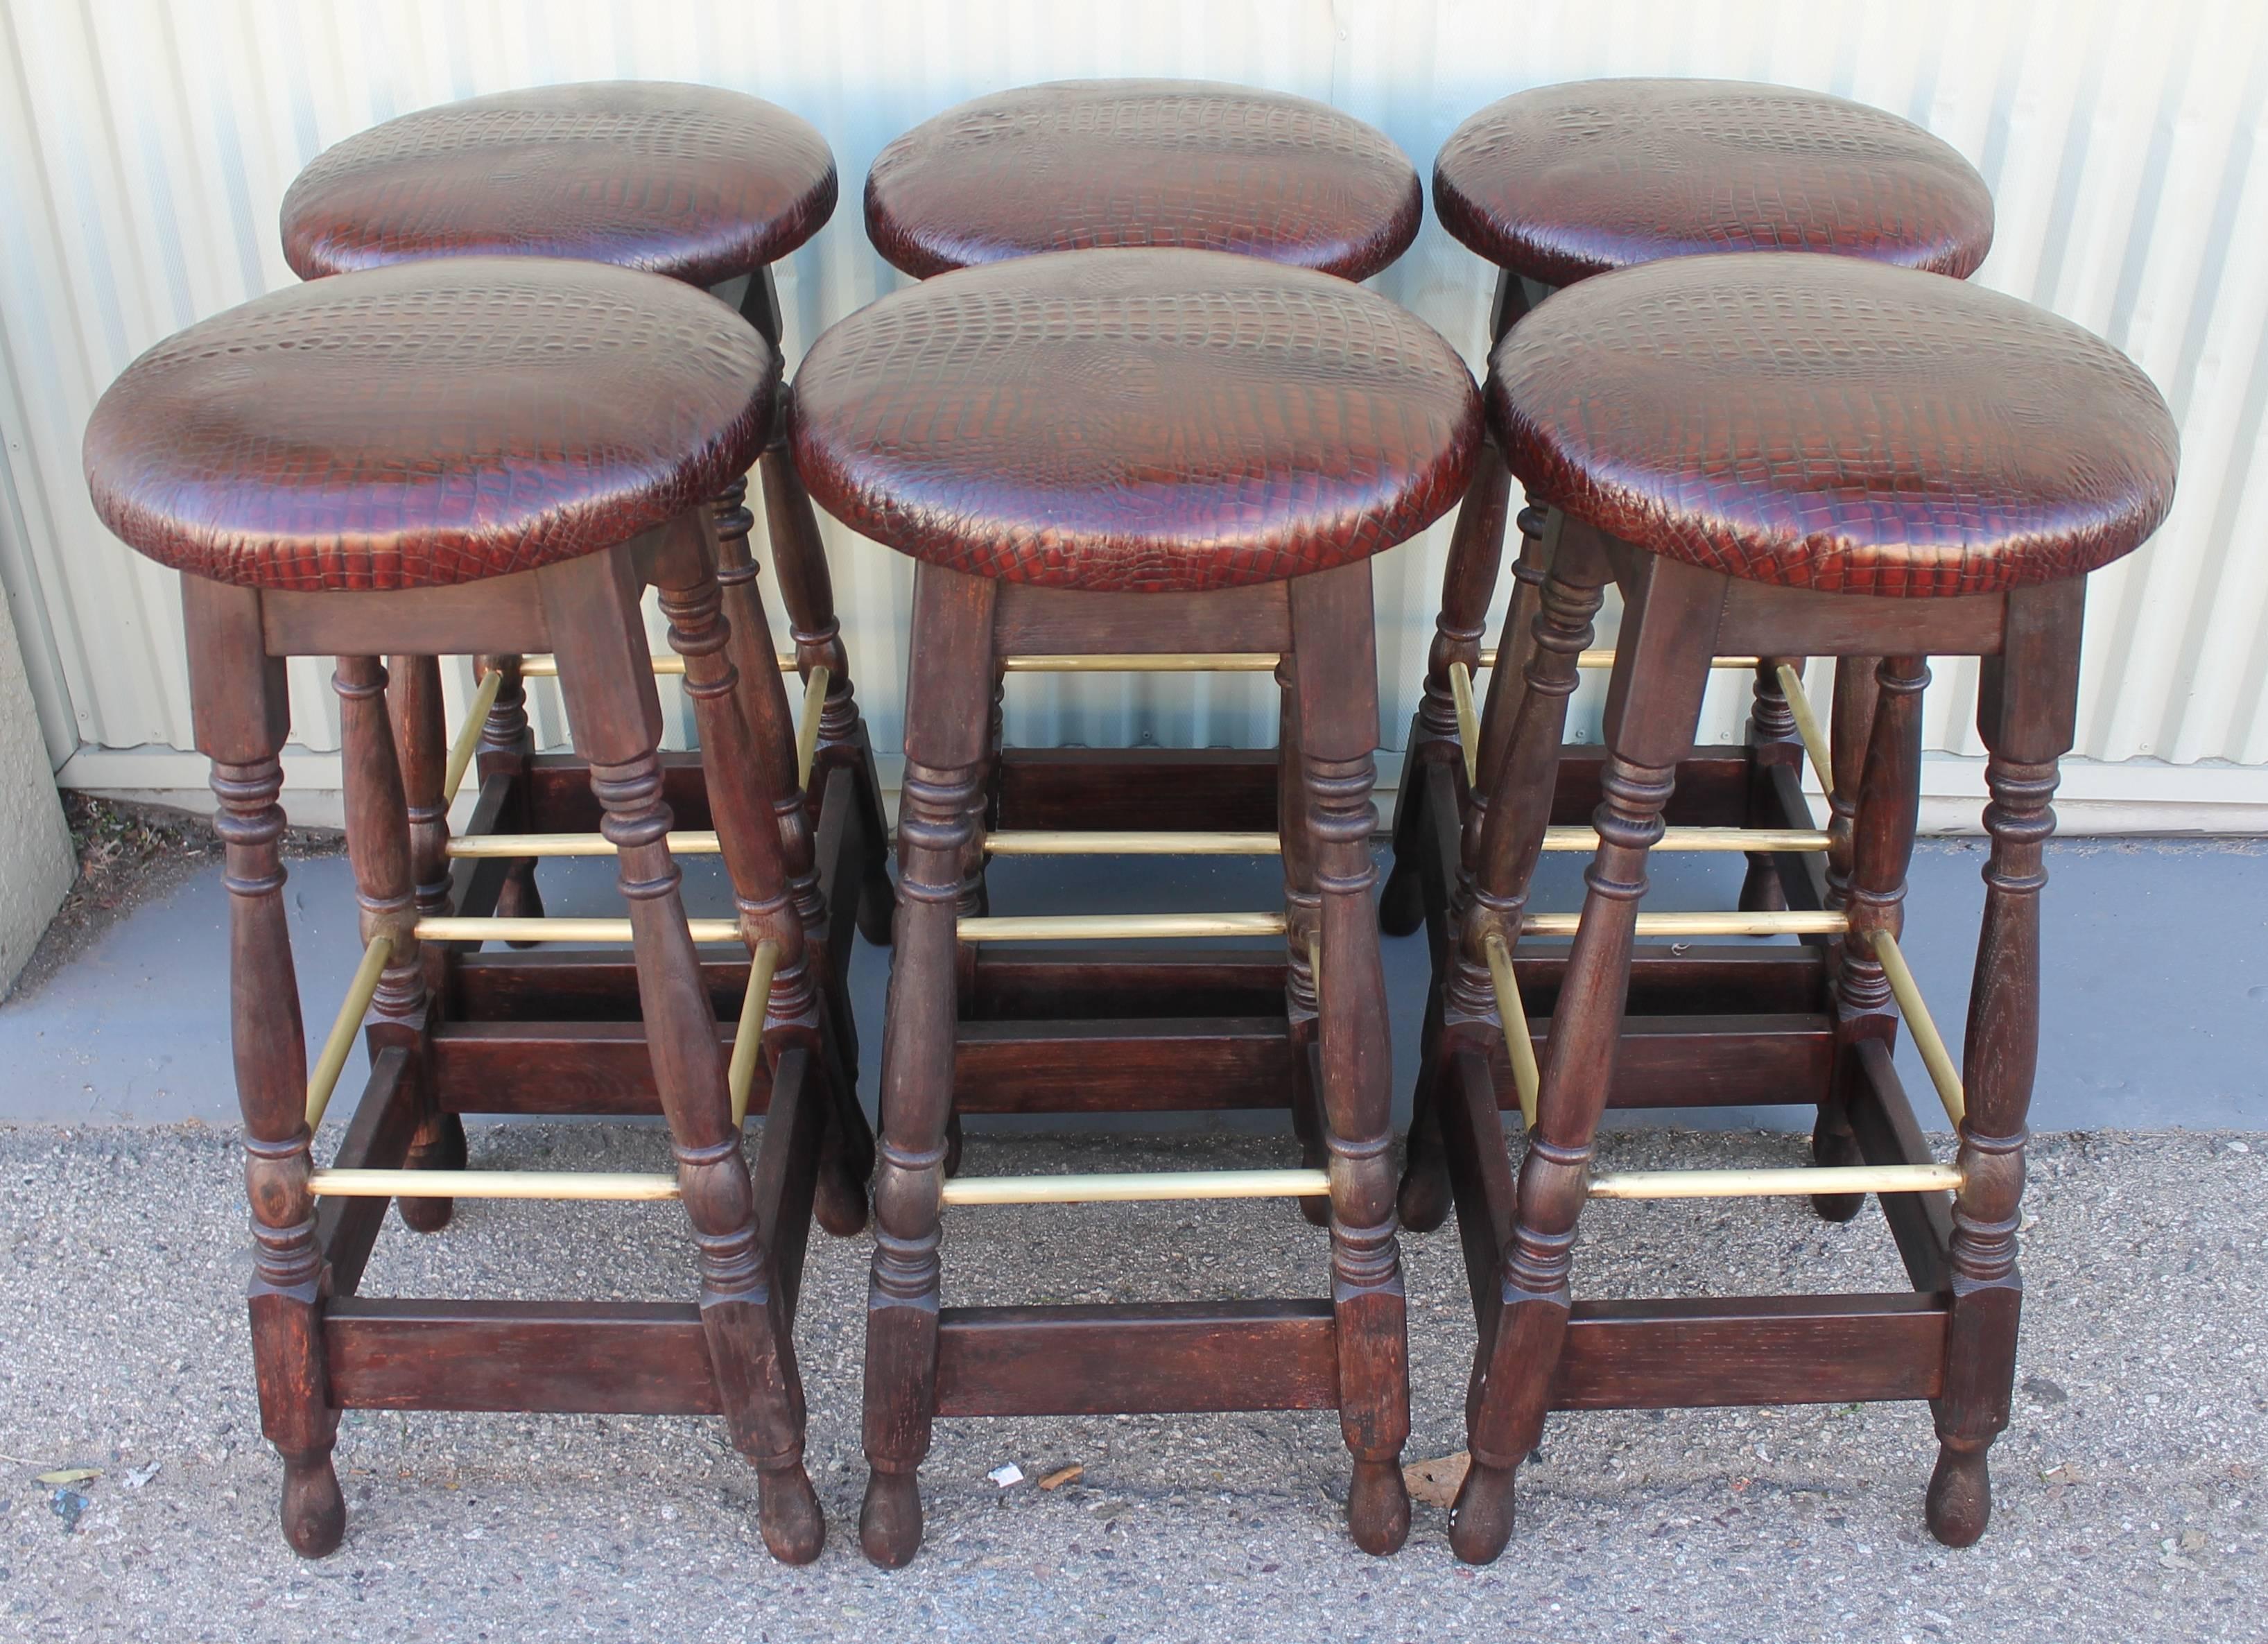 These wonderful bar stools can be sold in a pair or group of four or six. There are a total of six from the 1940s and all are in good condition. They are upholstered in a cool faux alligator leather. The brass foot rests are all original and could